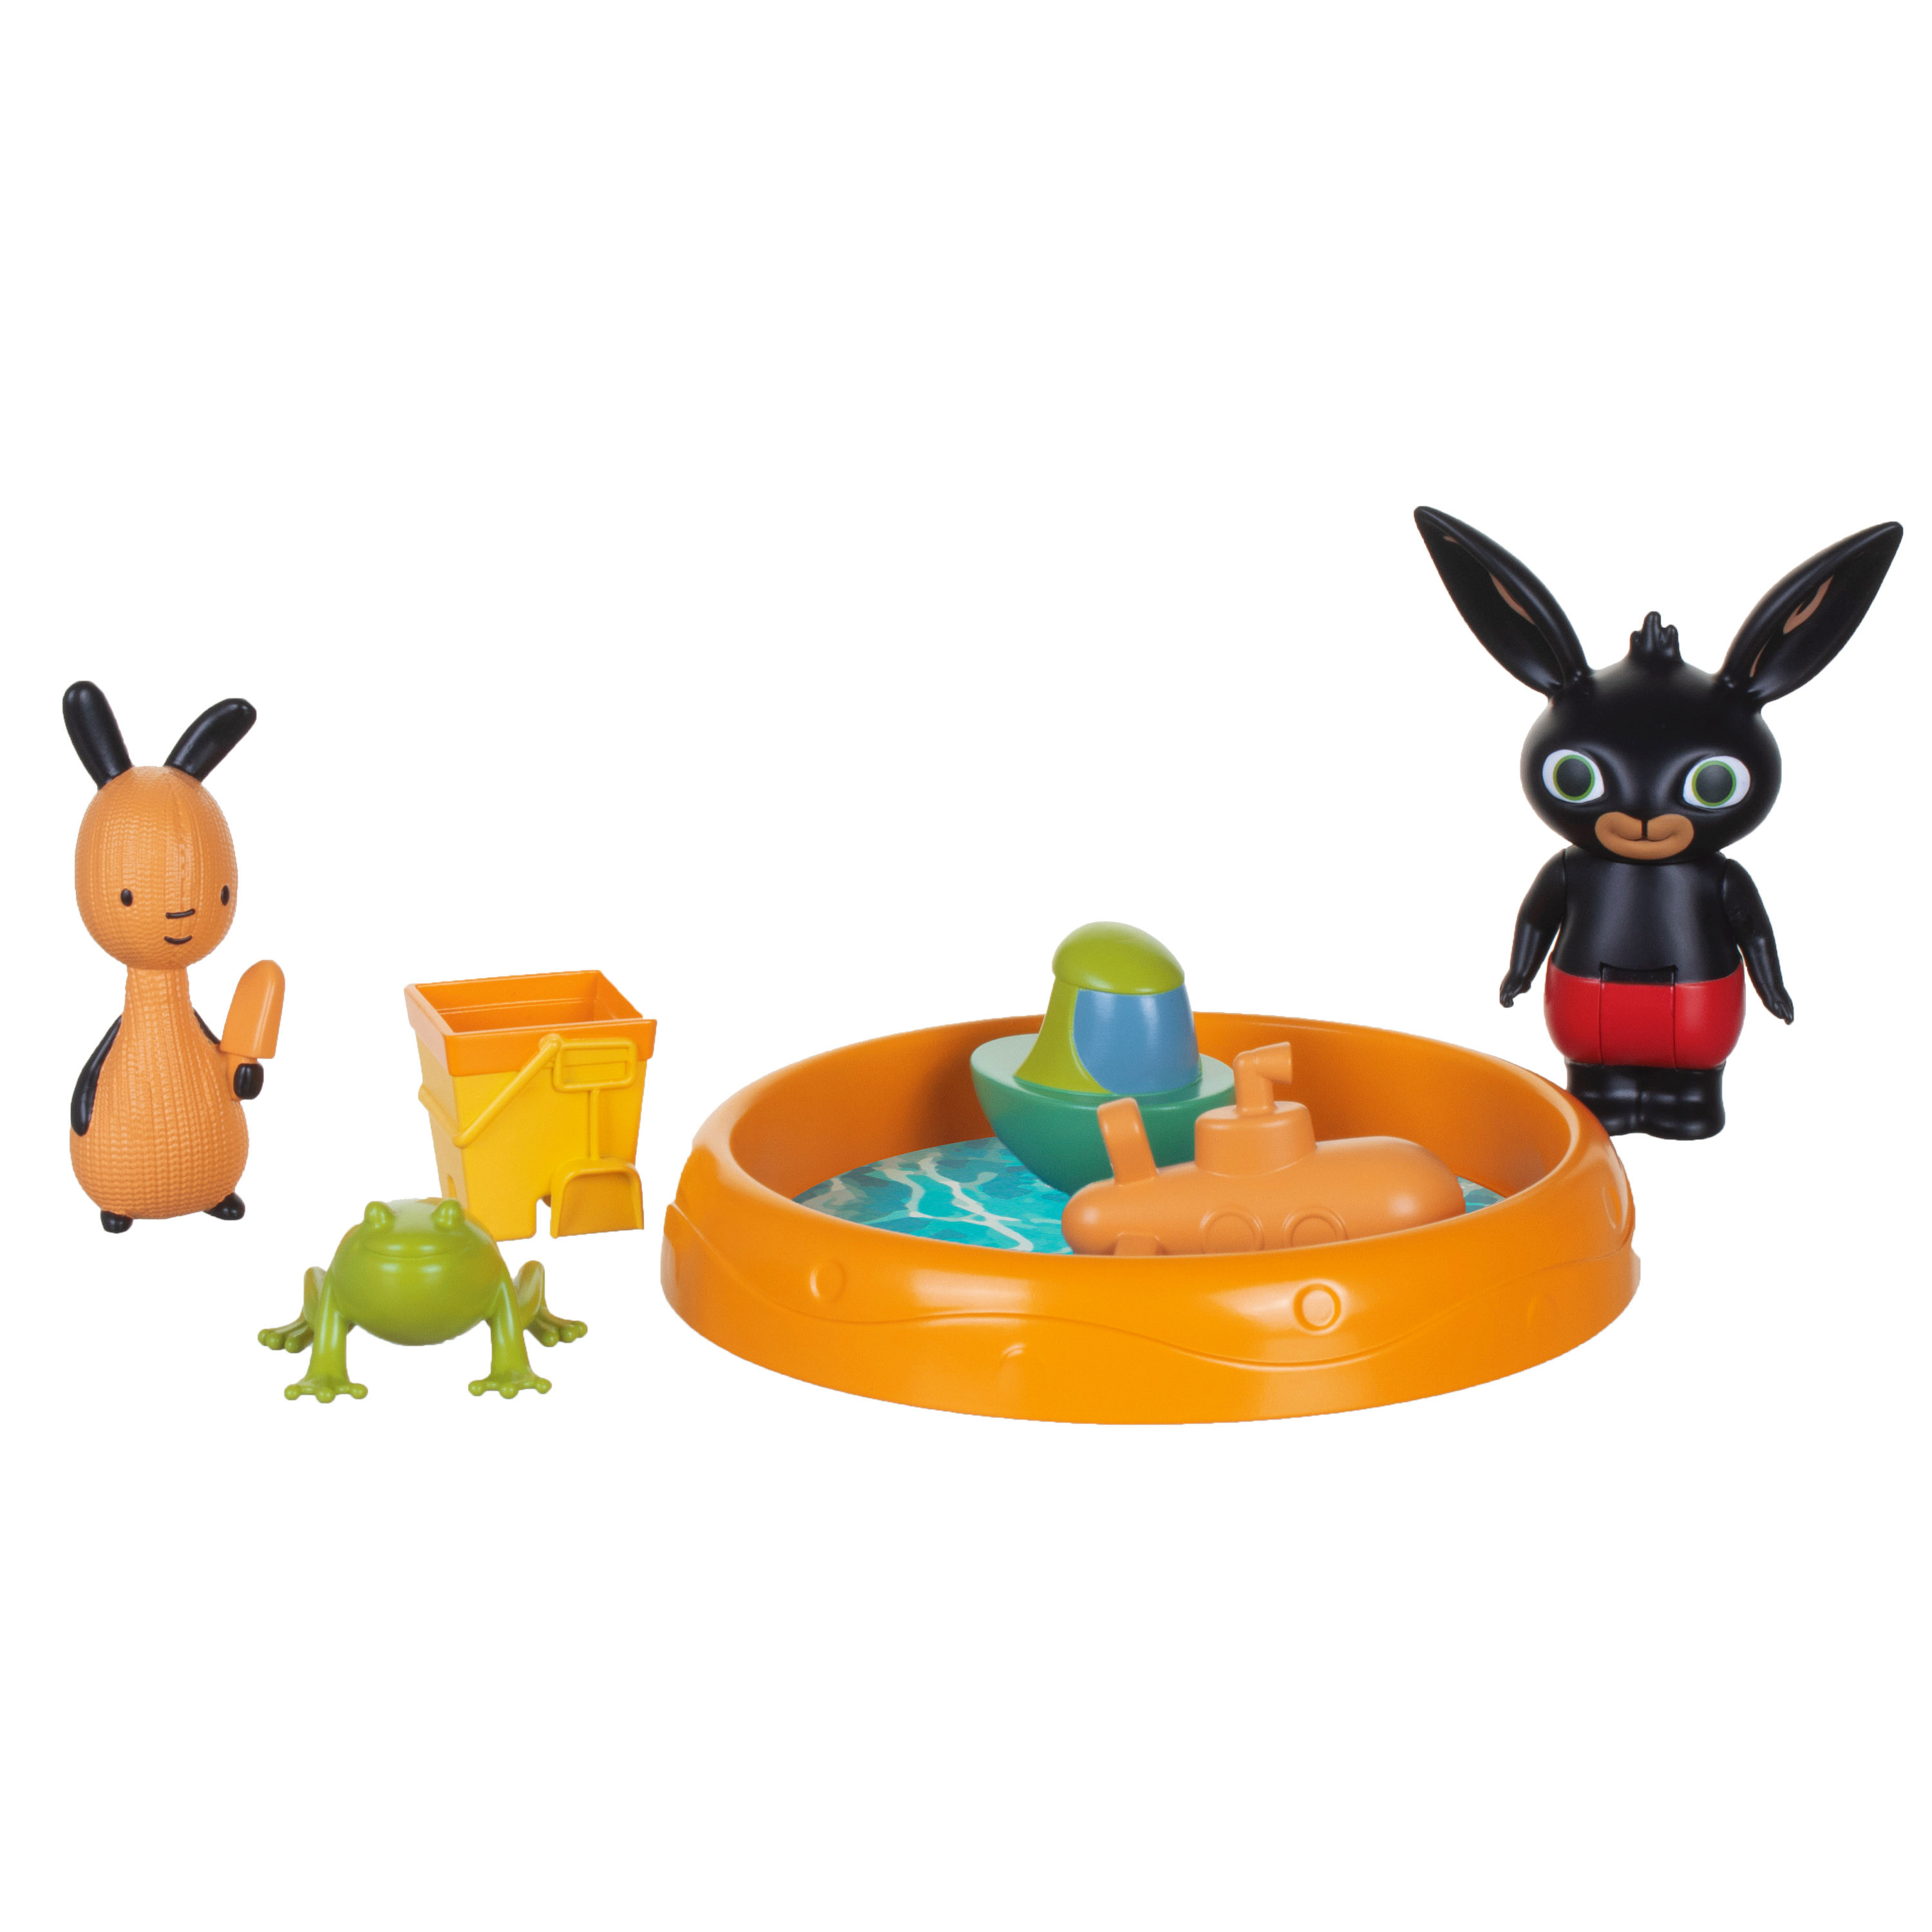 PADDLE WITH BING- PLAYSET WITH FIGURINES